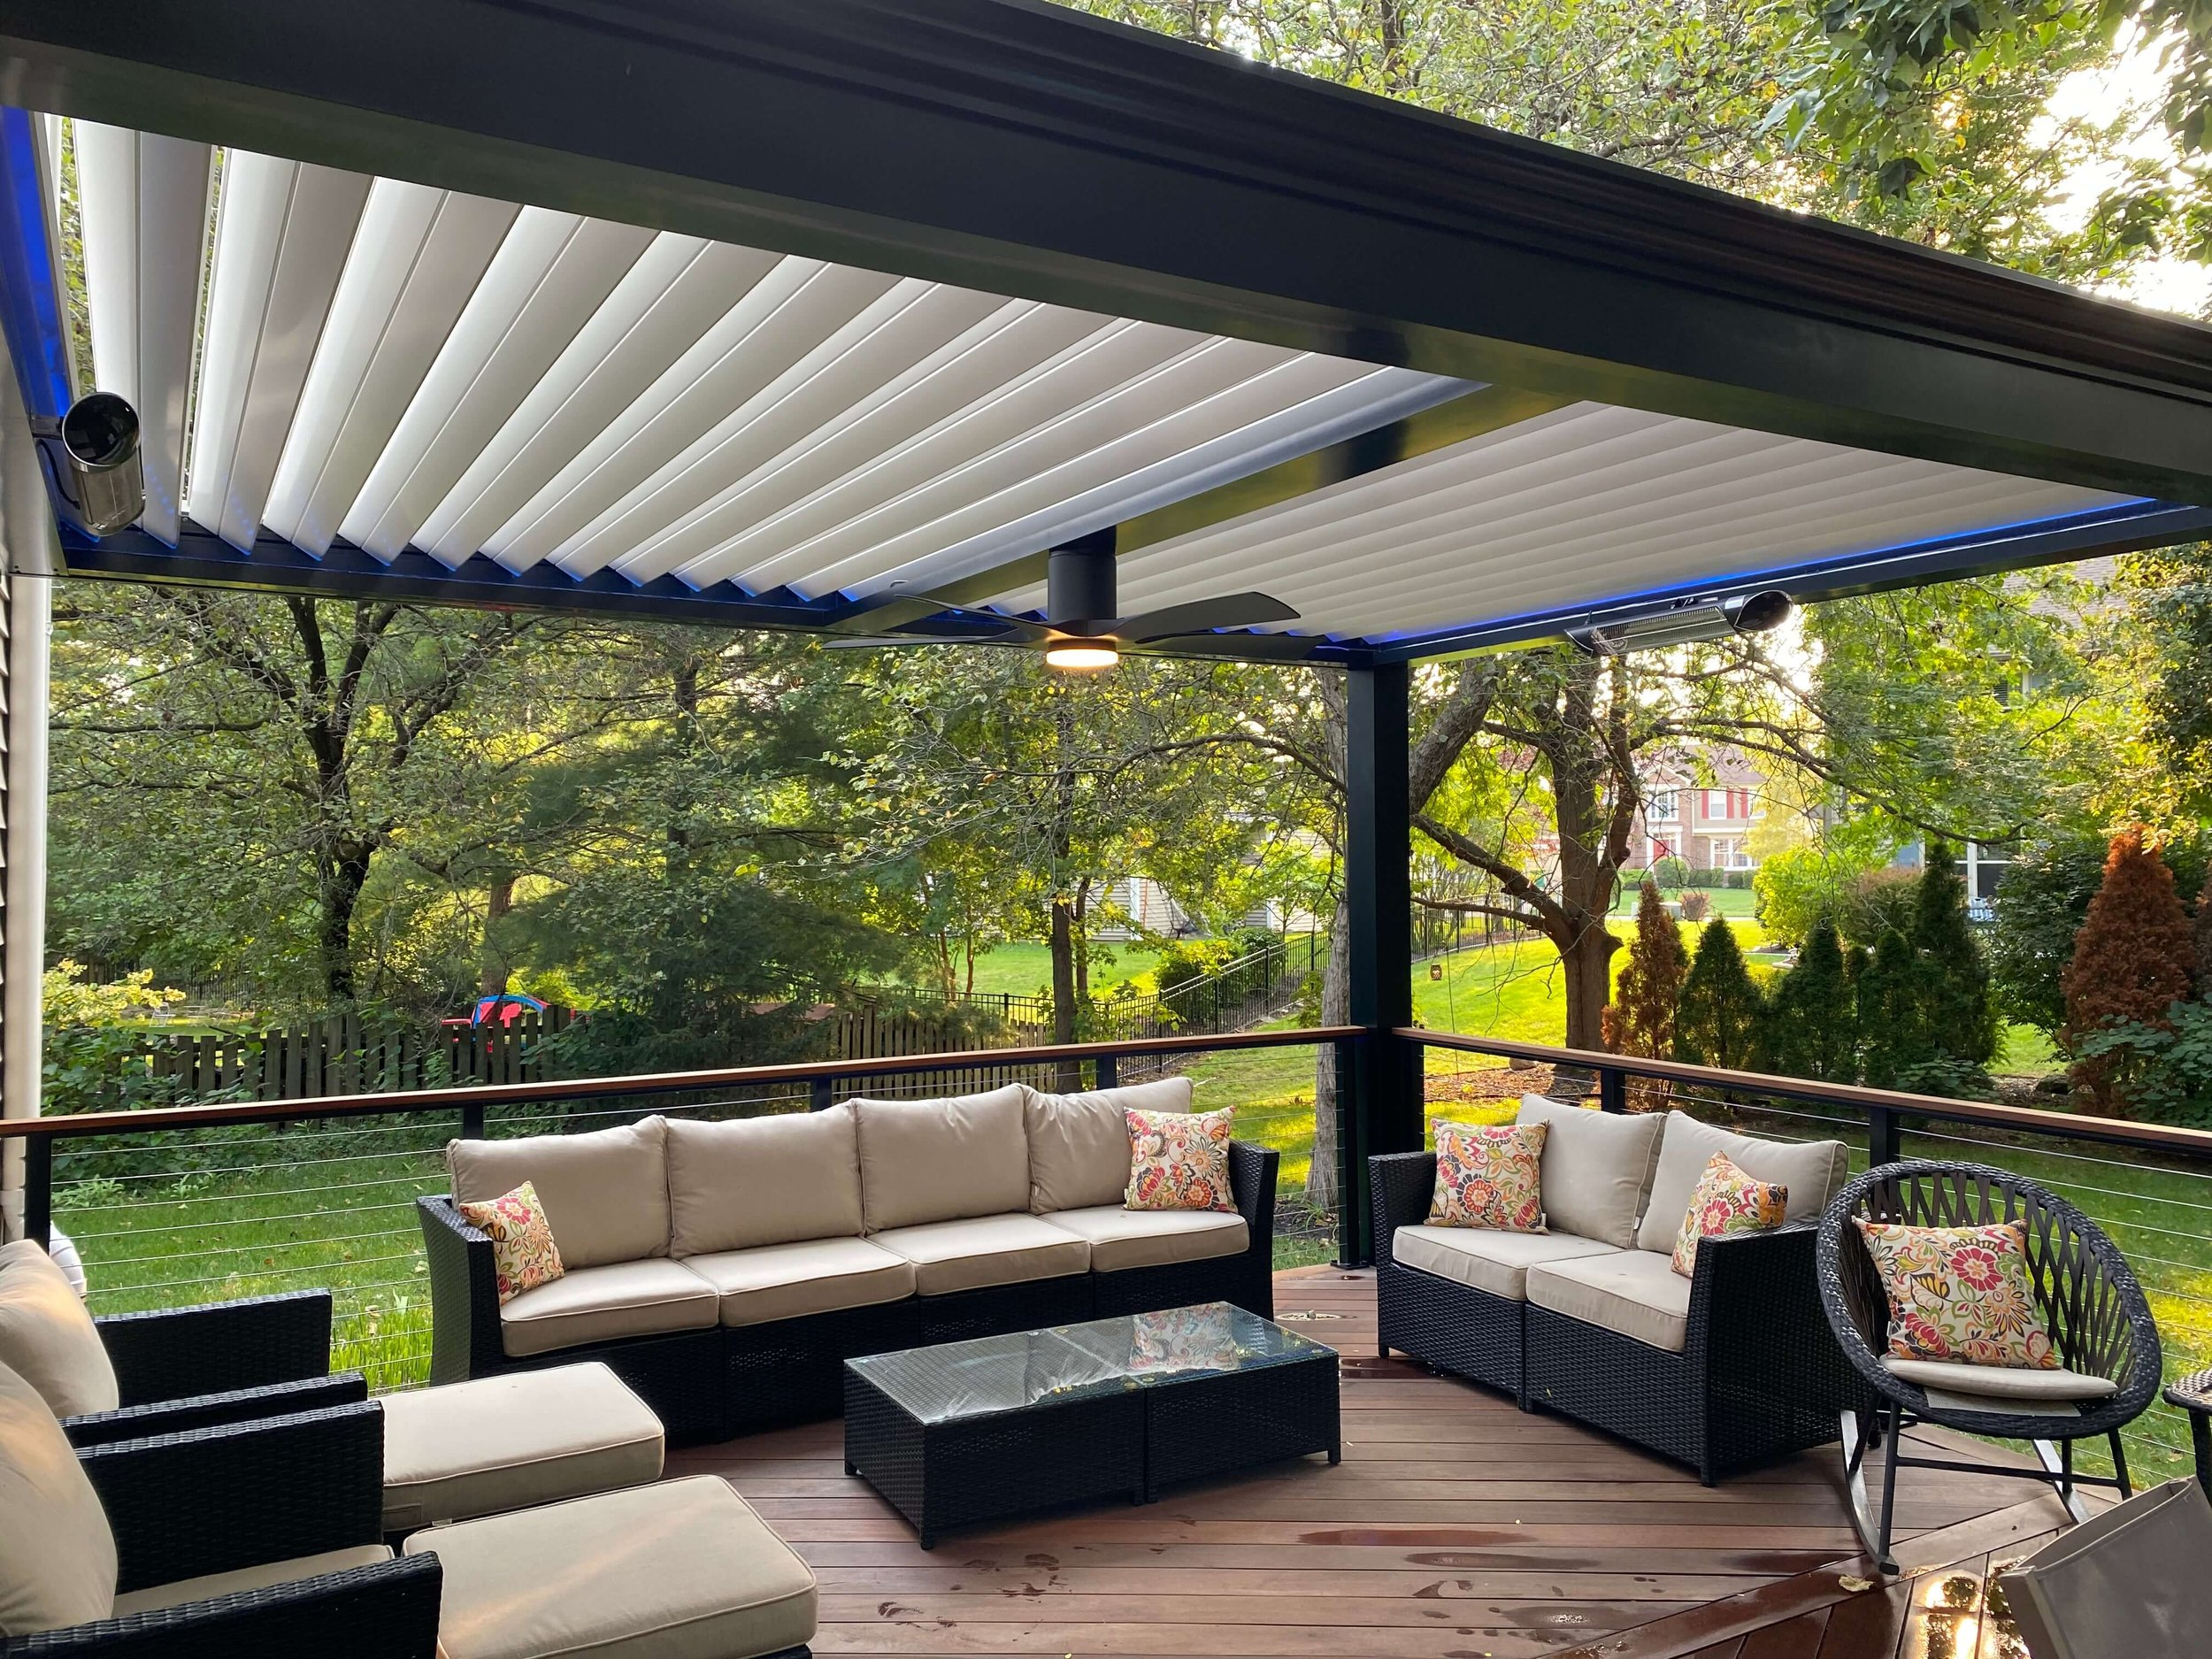 Backyard pergola on a  deck with seating area and lighting